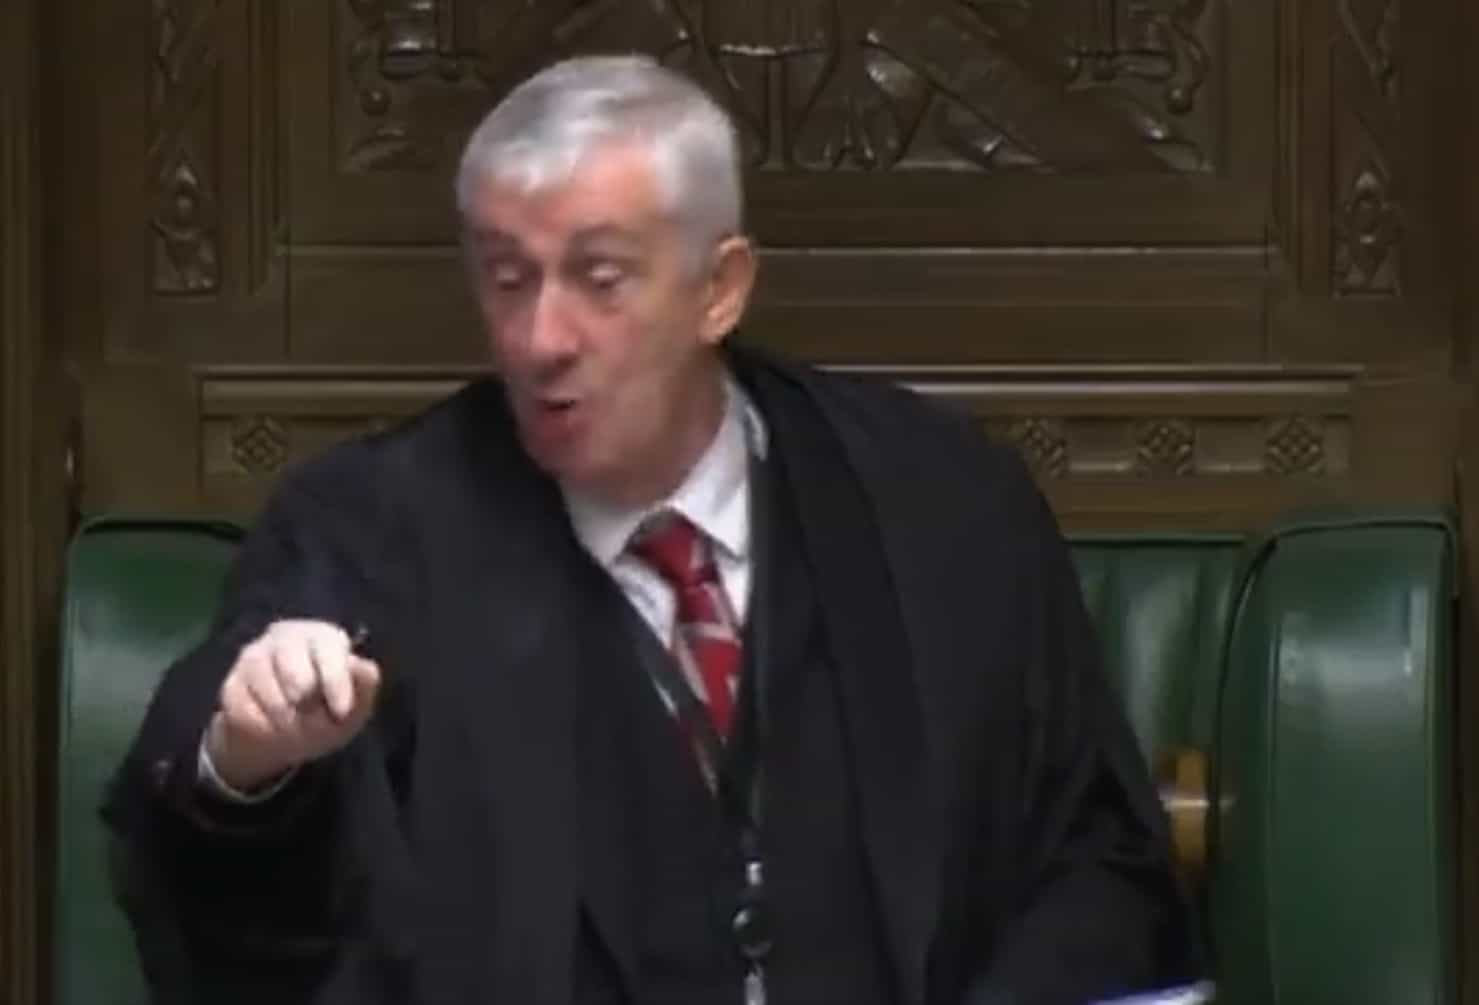 Speaker Lindsay Hoyle fumes at Johnson as PMQs descends into chaos